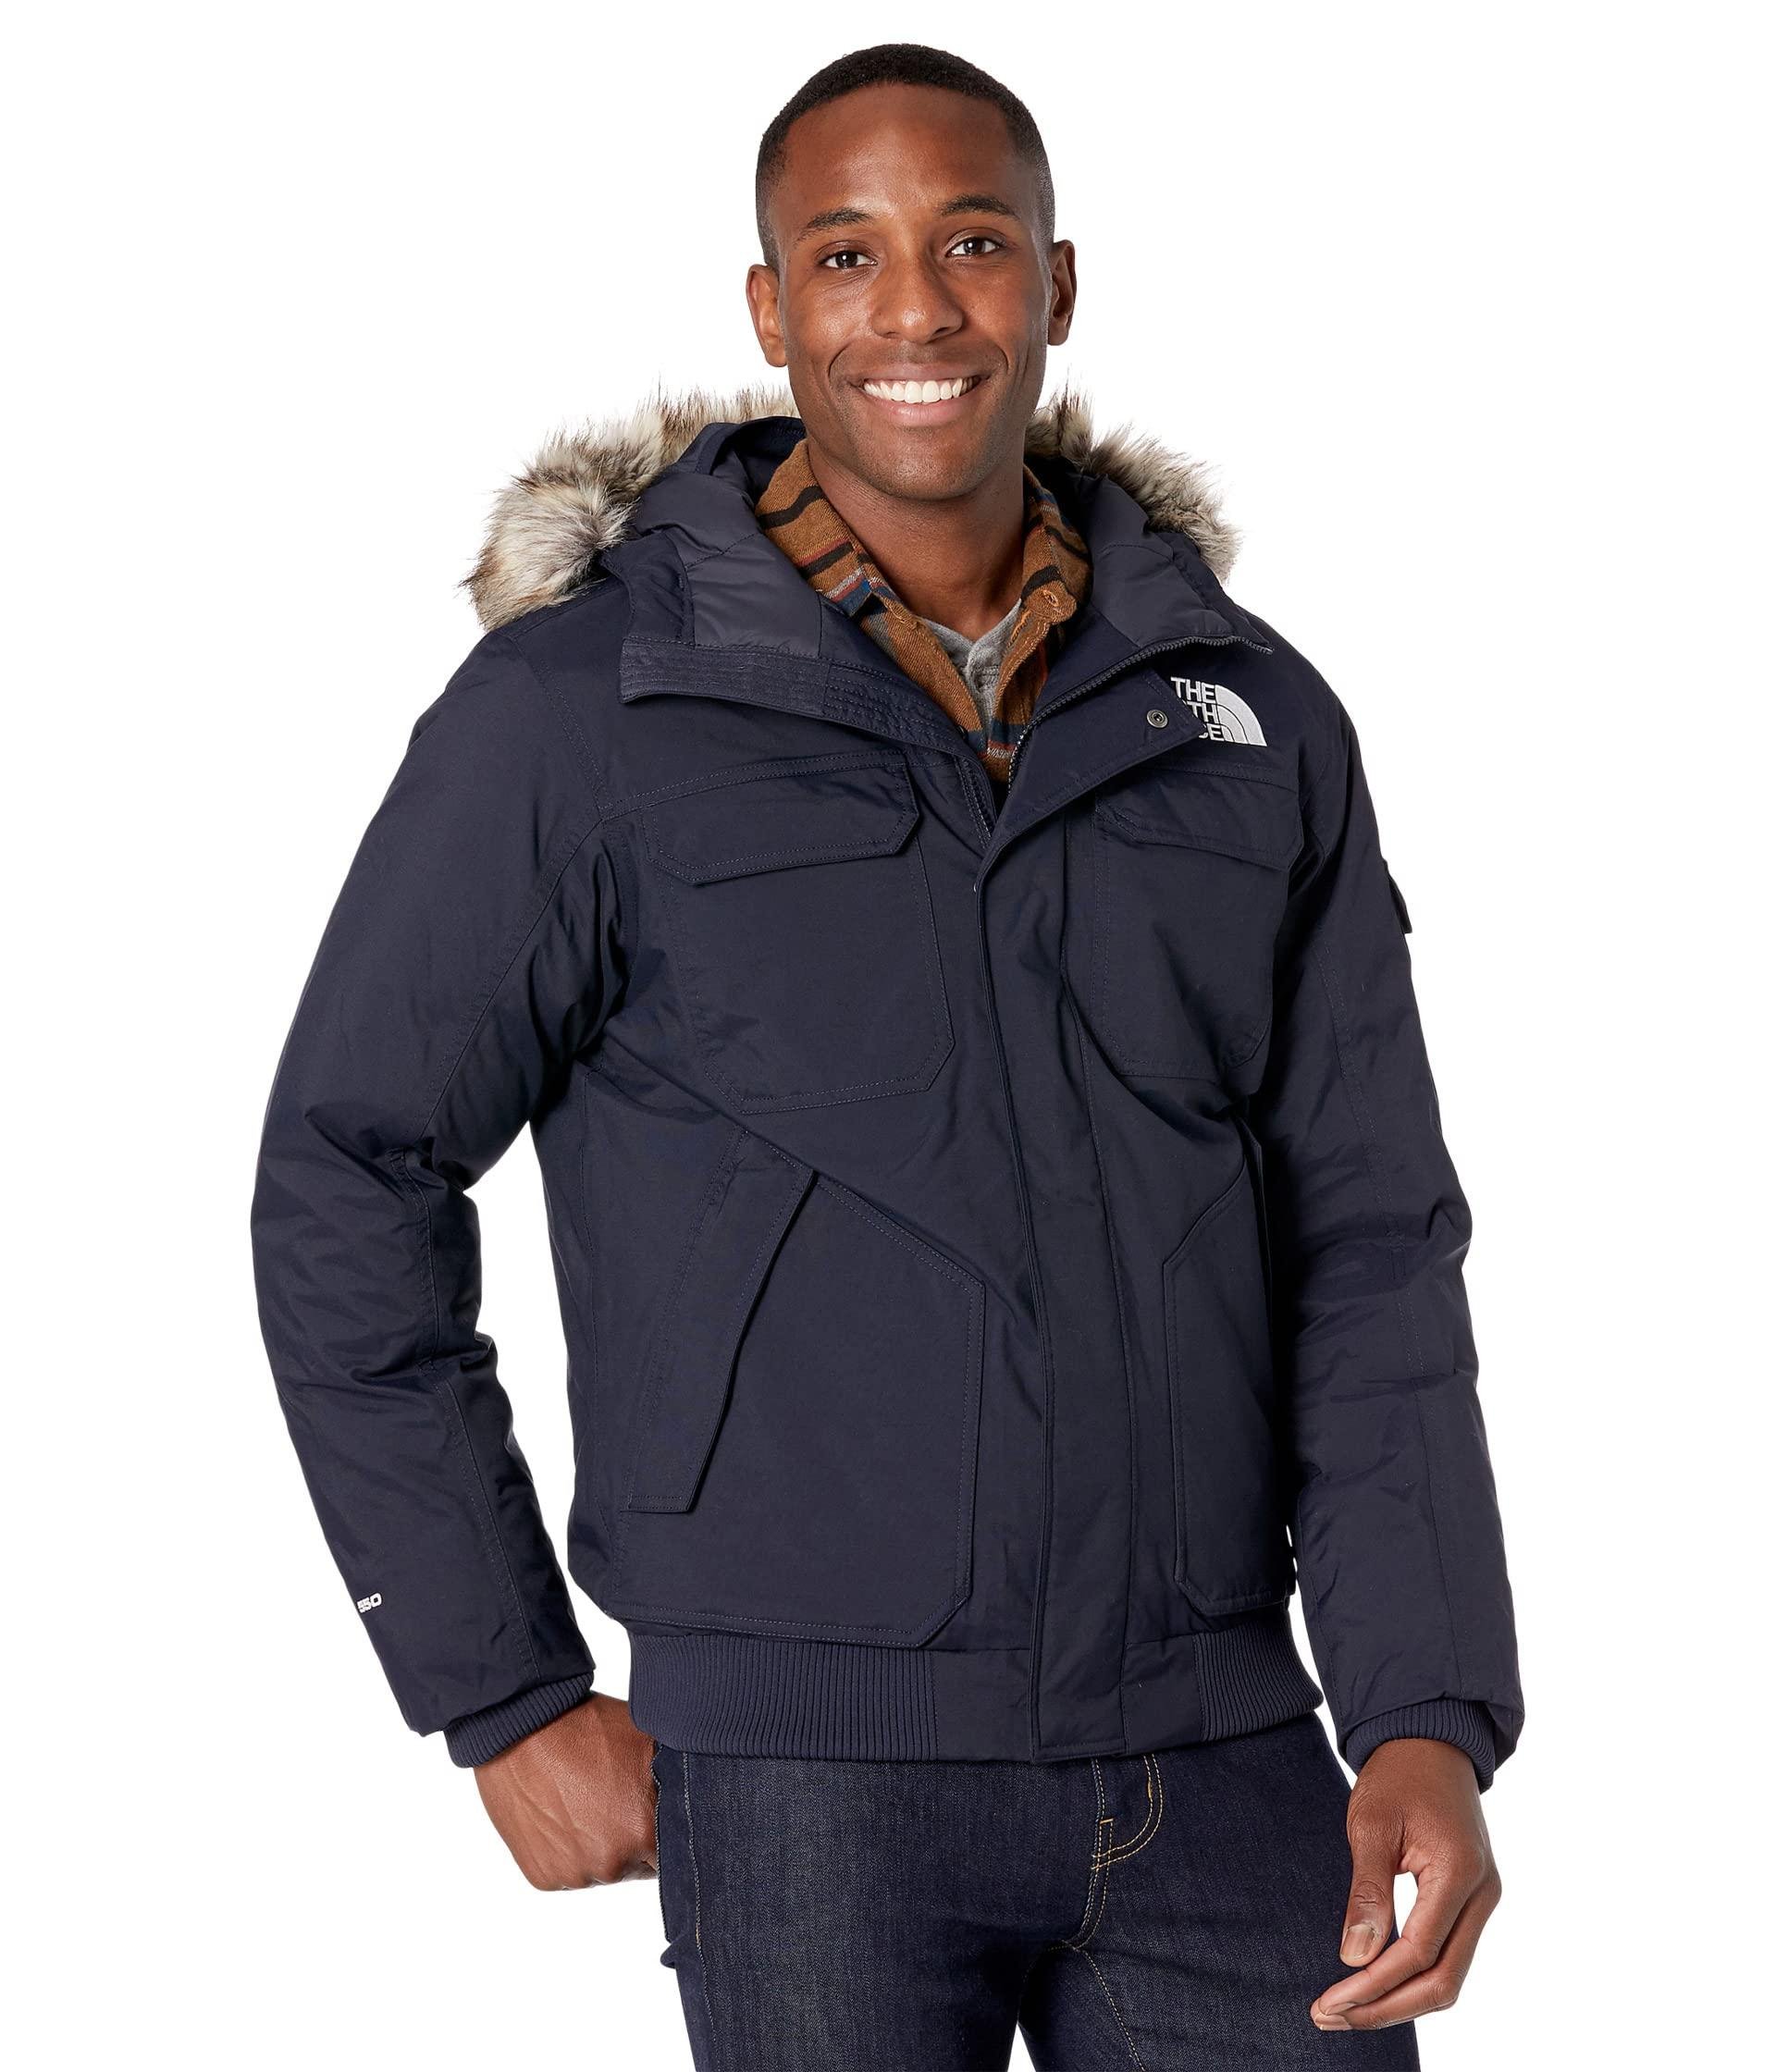 The North Face Gotham Jacket Iii in Navy (Blue) for Men - Lyst